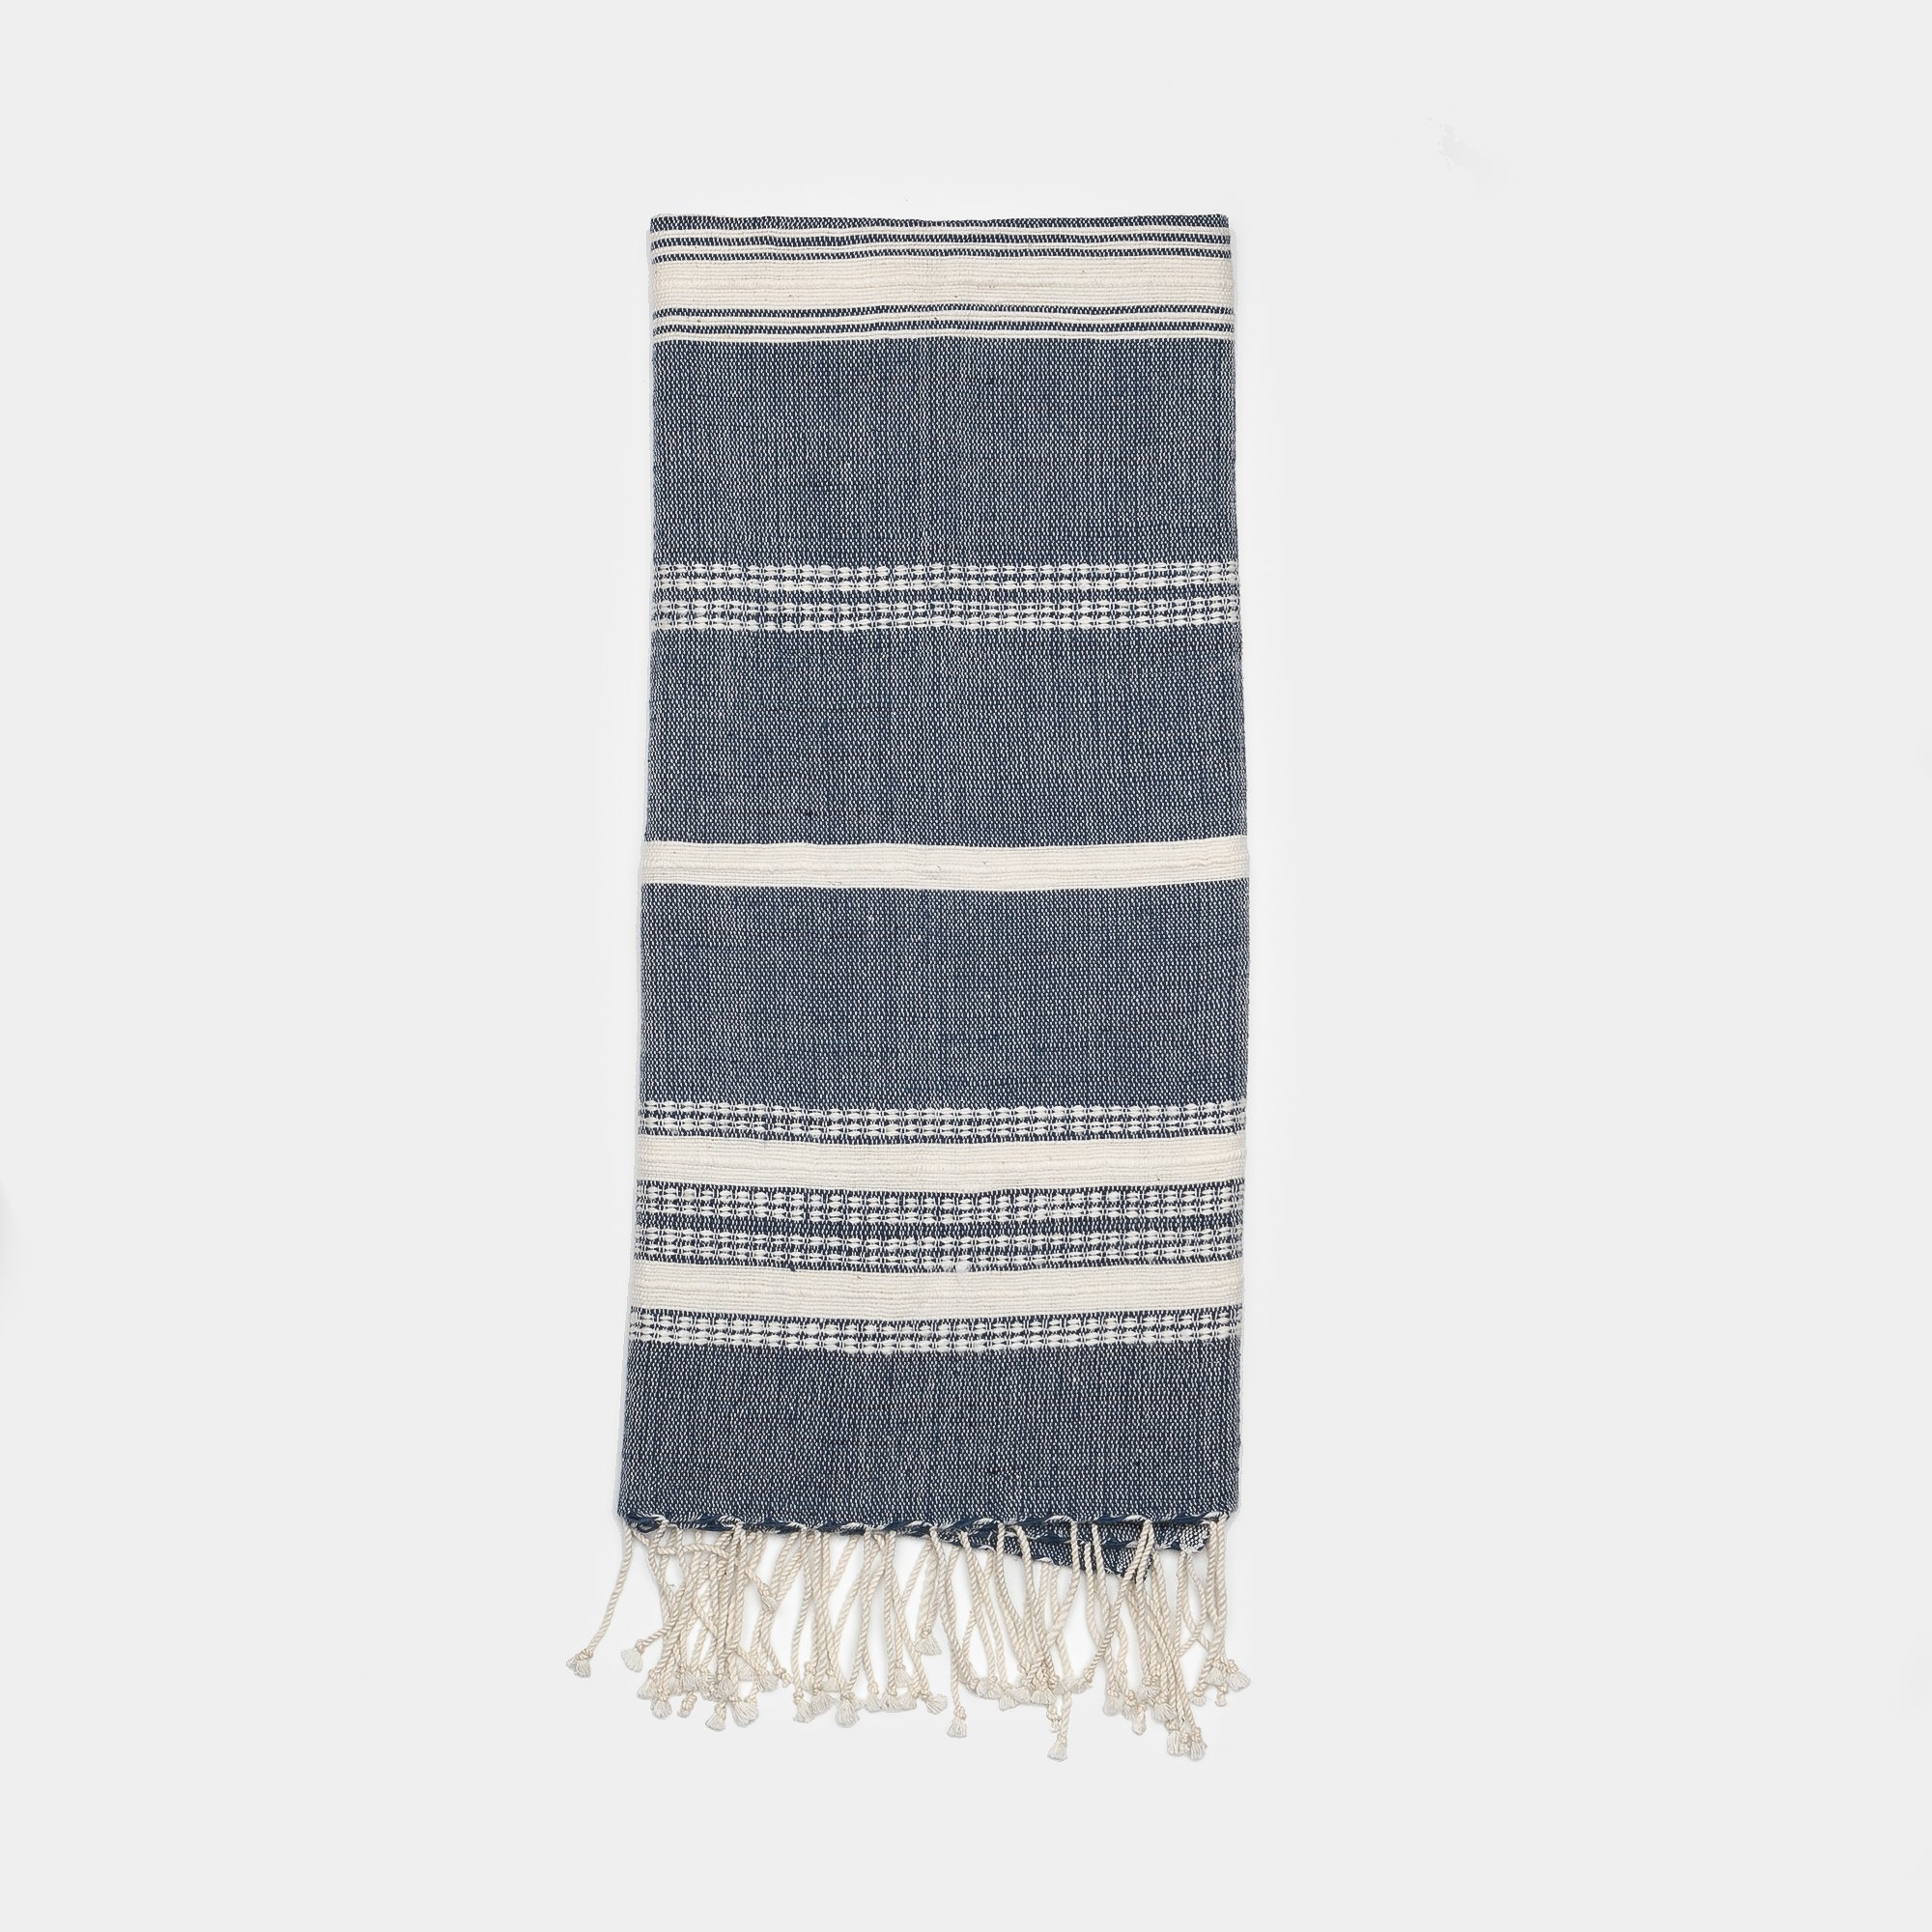 ALL-SORTS-OF-SHOPPE-ADEN-HAND-TOWEL